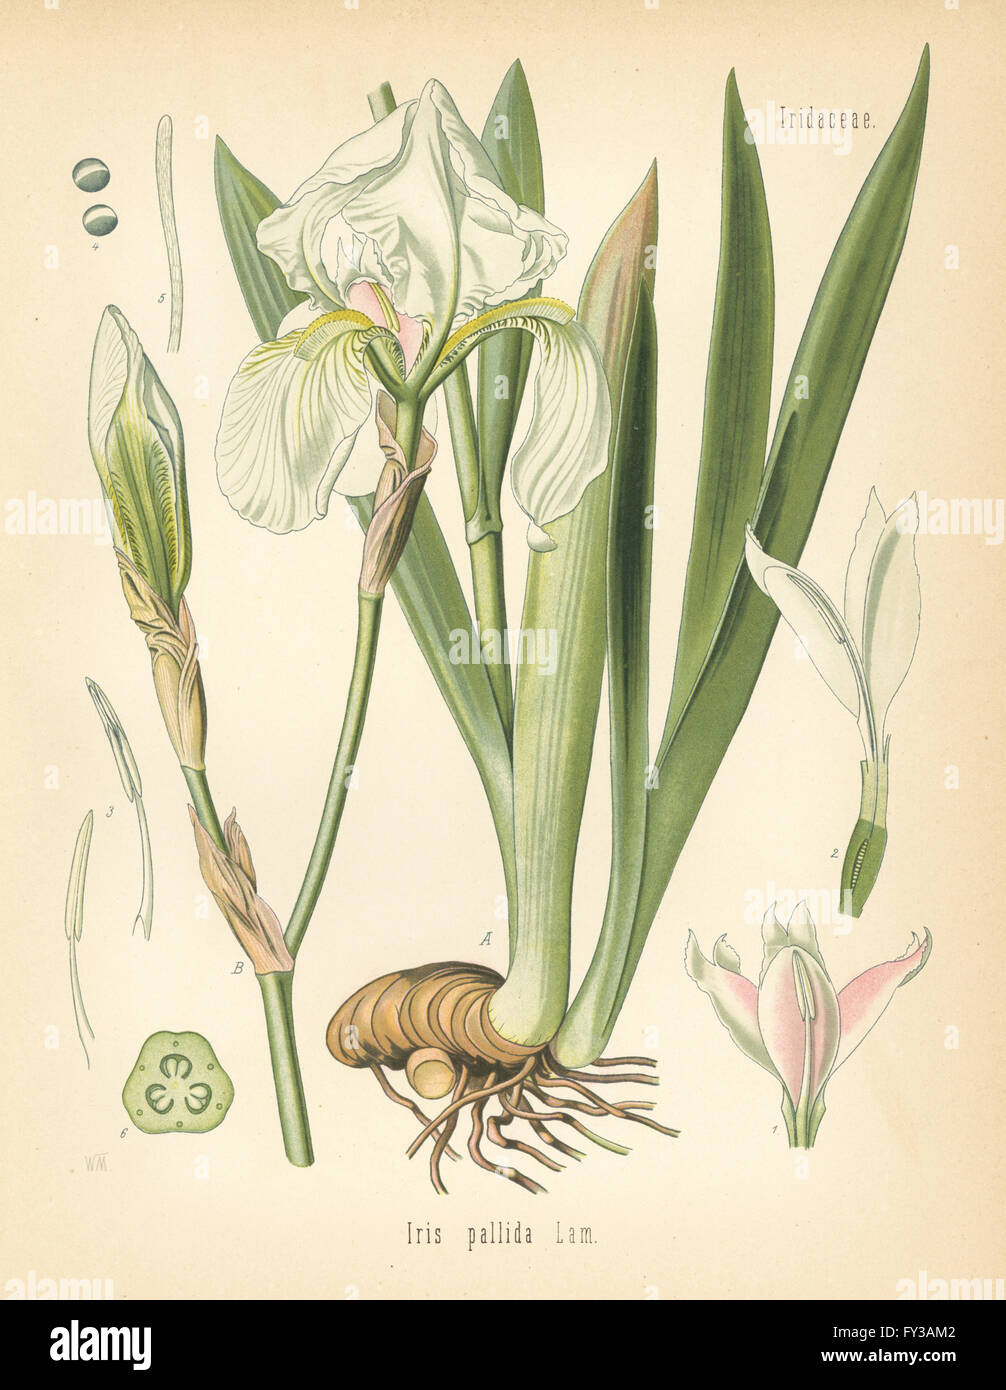 Dalmatian iris or sweet iris, Iris pallida. Chromolithograph after a botanical illustration by Walther Muller from Hermann Adolph Koehler's Medicinal Plants, edited by Gustav Pabst, Koehler, Germany, 1887. Stock Photo